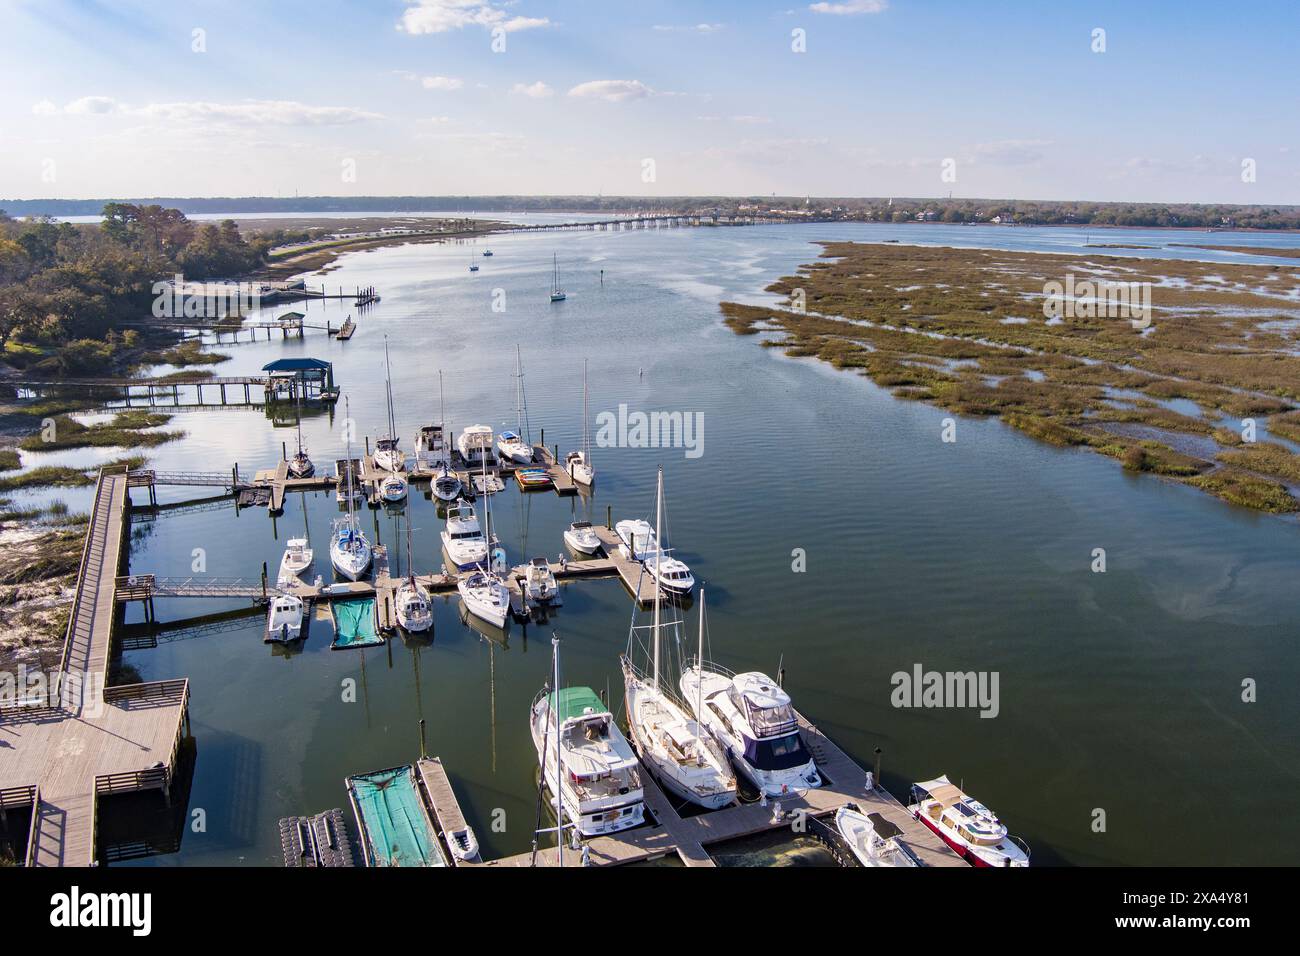 Aerial view of the Marina on Ladys Island in Beaufort, South Carolina. Stock Photo